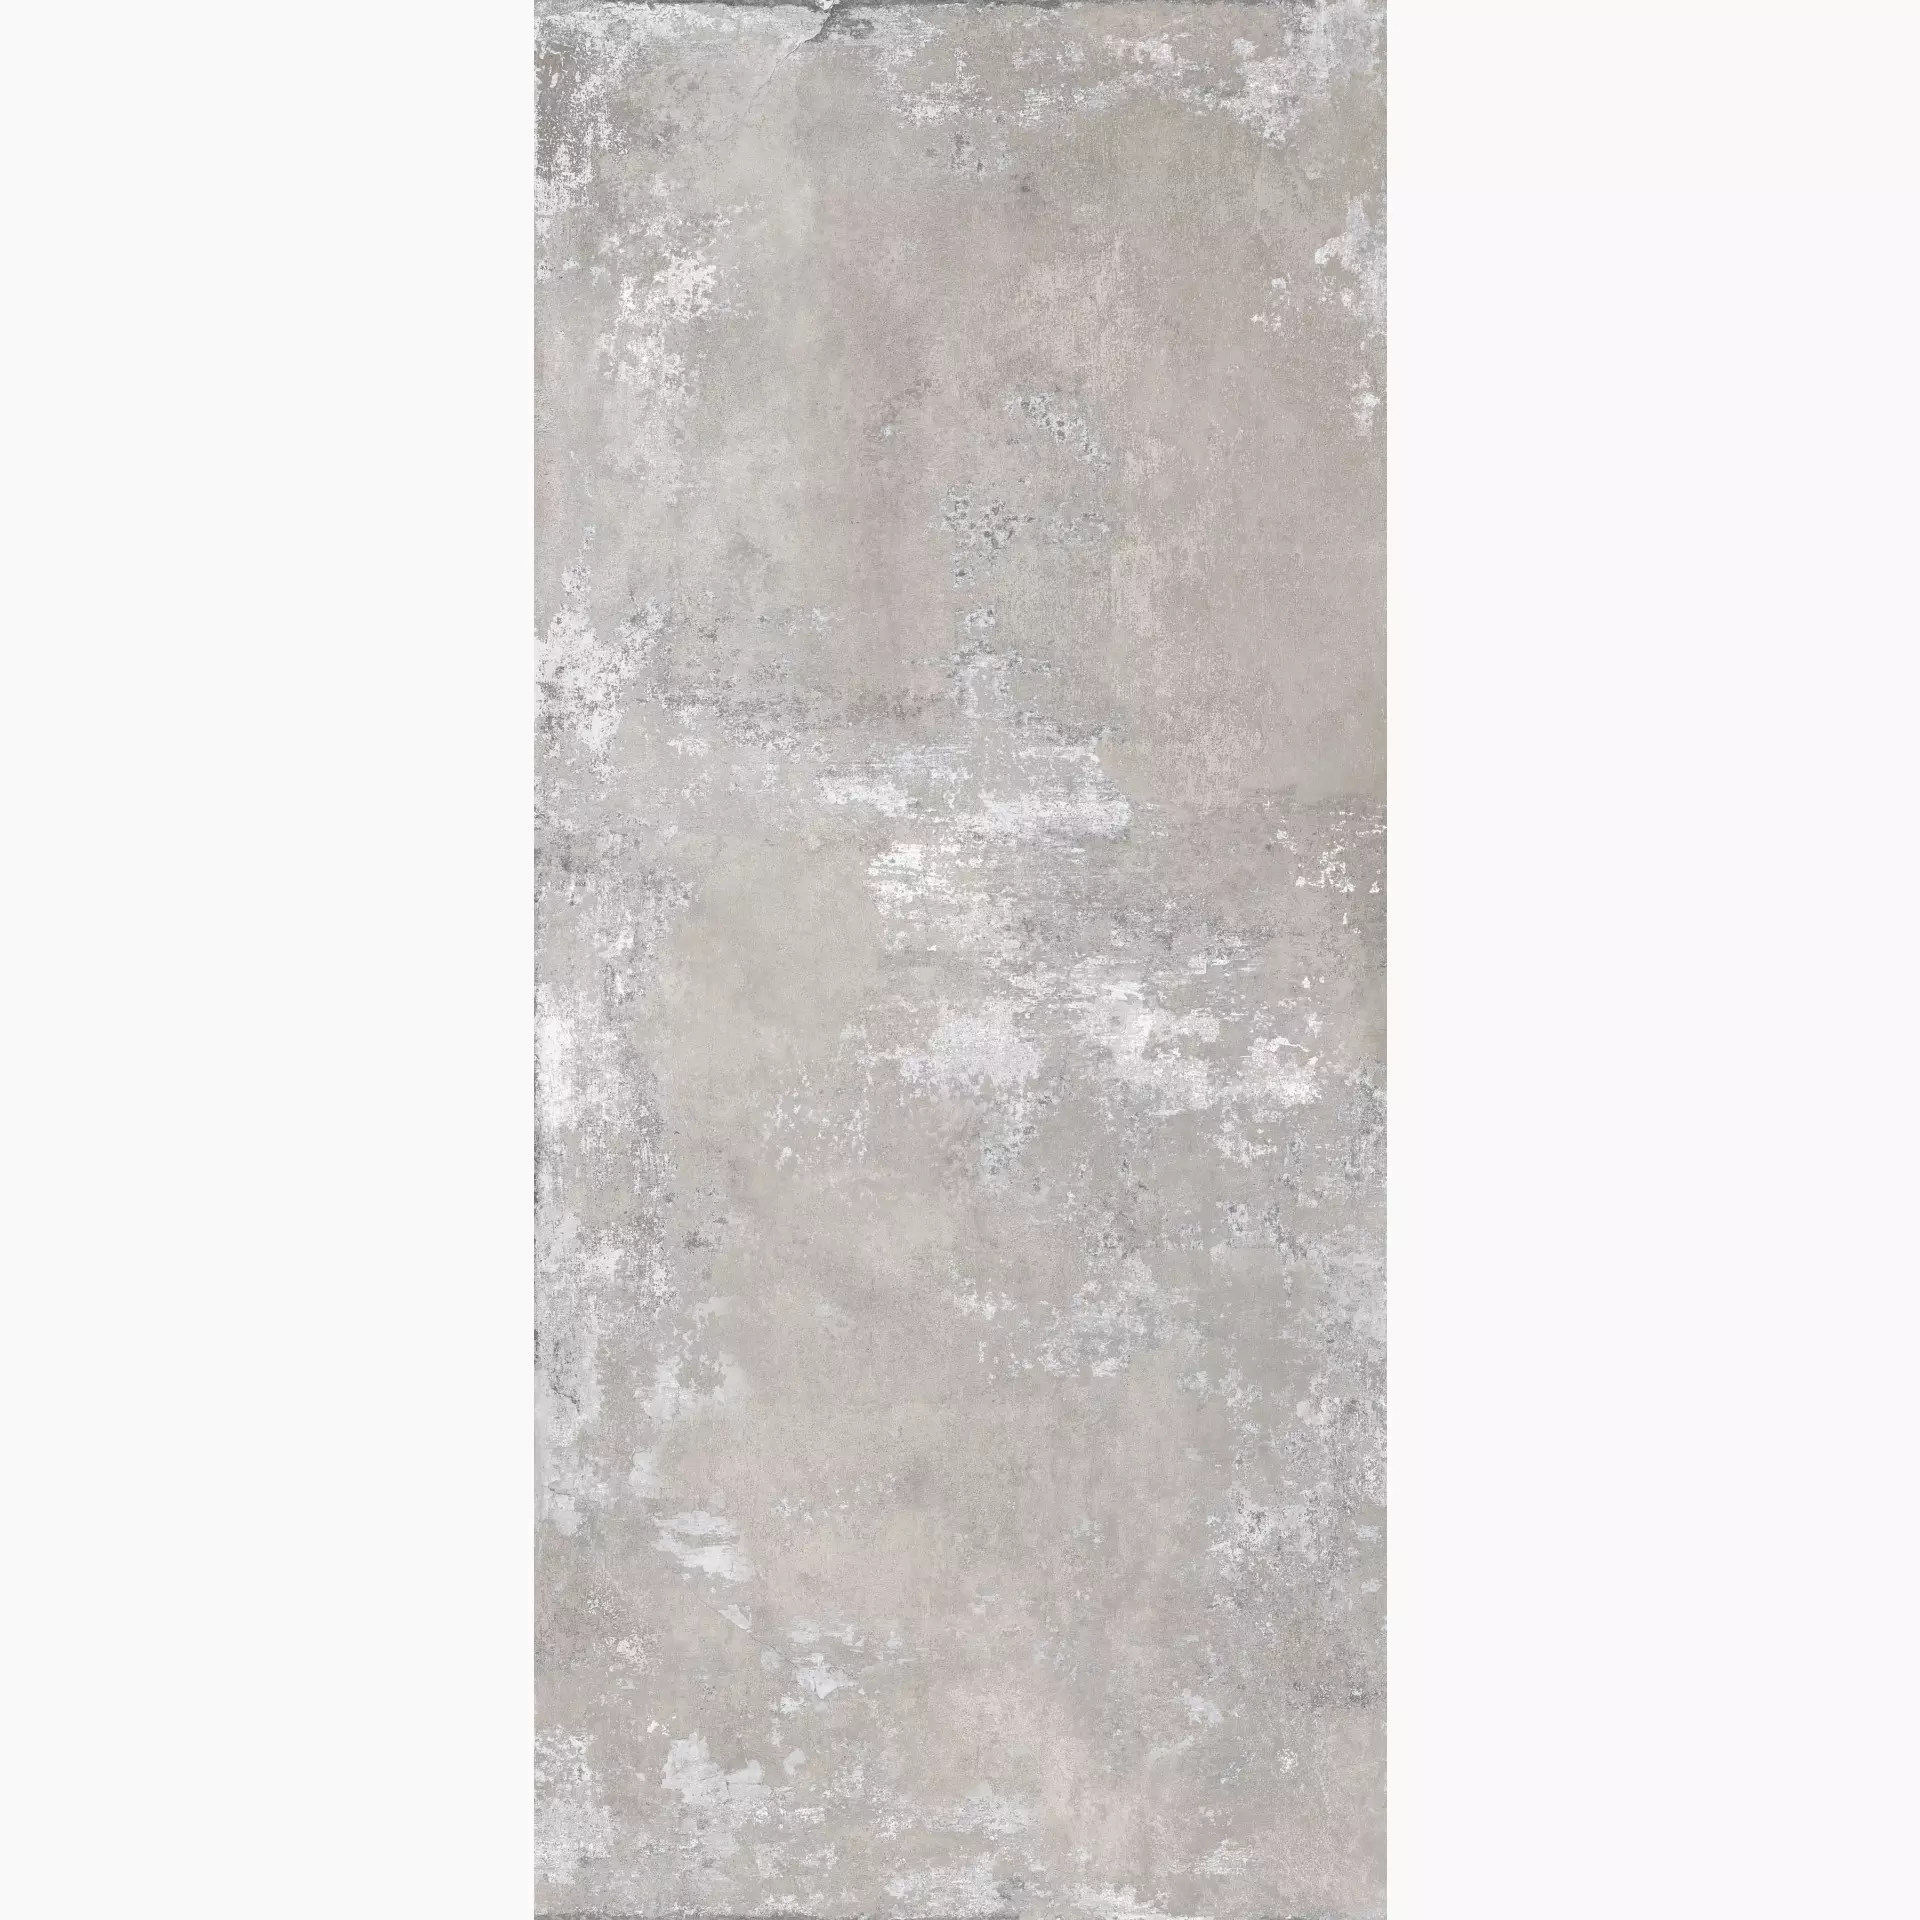 ABK Ghost Grey Naturale PF60008647 120x280cm rectified 6mm